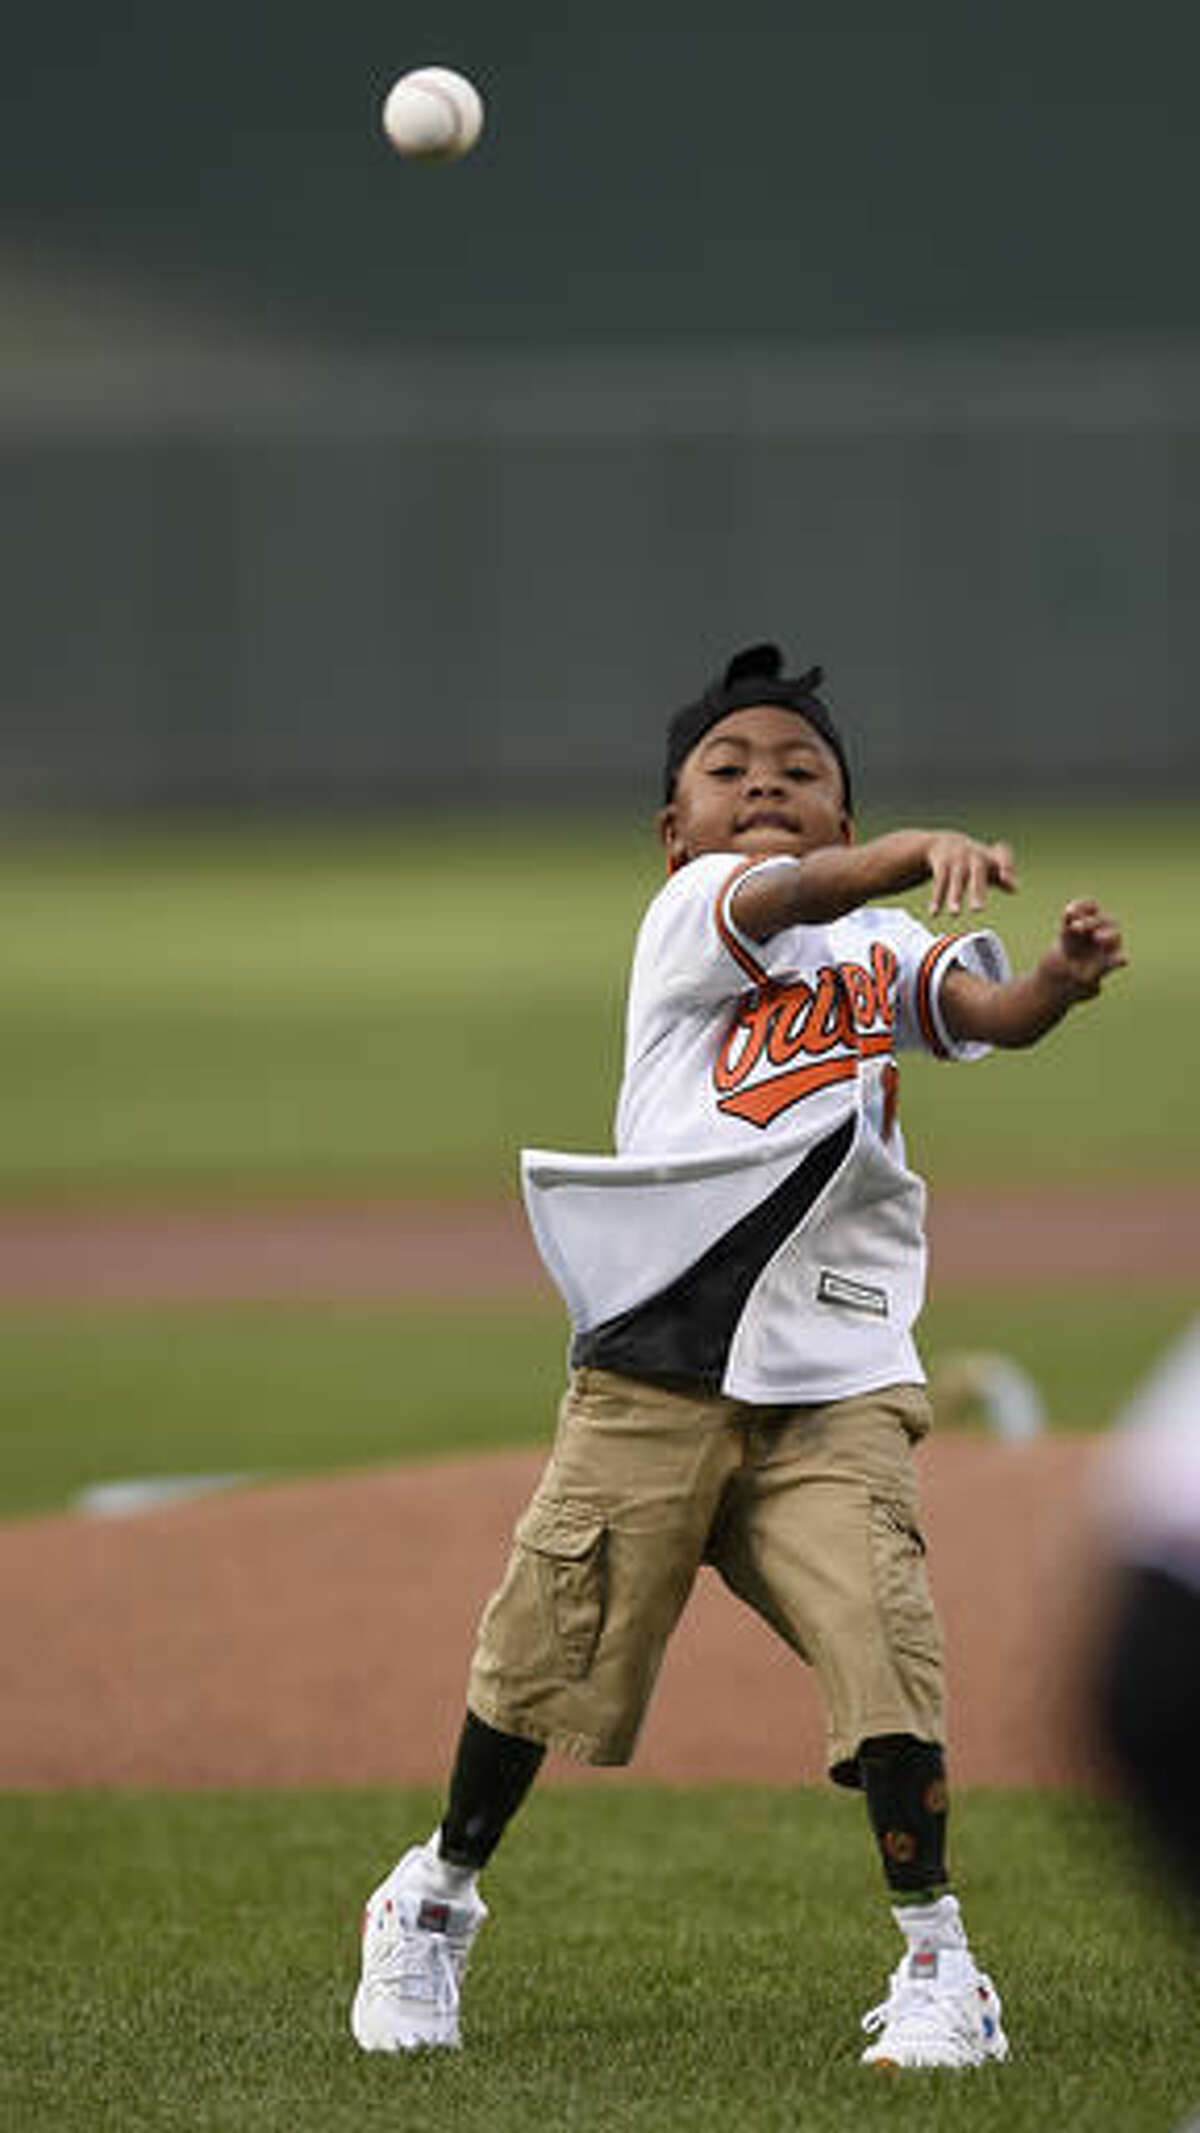 Nine-year-old Zion Harvey, the world's first child to receive a bilateral hand transplant, throws out the first pitch before the Baltimore Orioles and Texas Rangers baseball in Baltimore, Tuesday, Aug. 2, 2016. Harvey, who lost his hands and feet to a serious infection has become the youngest patient to receive a double-hand transplant, surgeons said Tuesday. (AP Photo/Gail Burton)